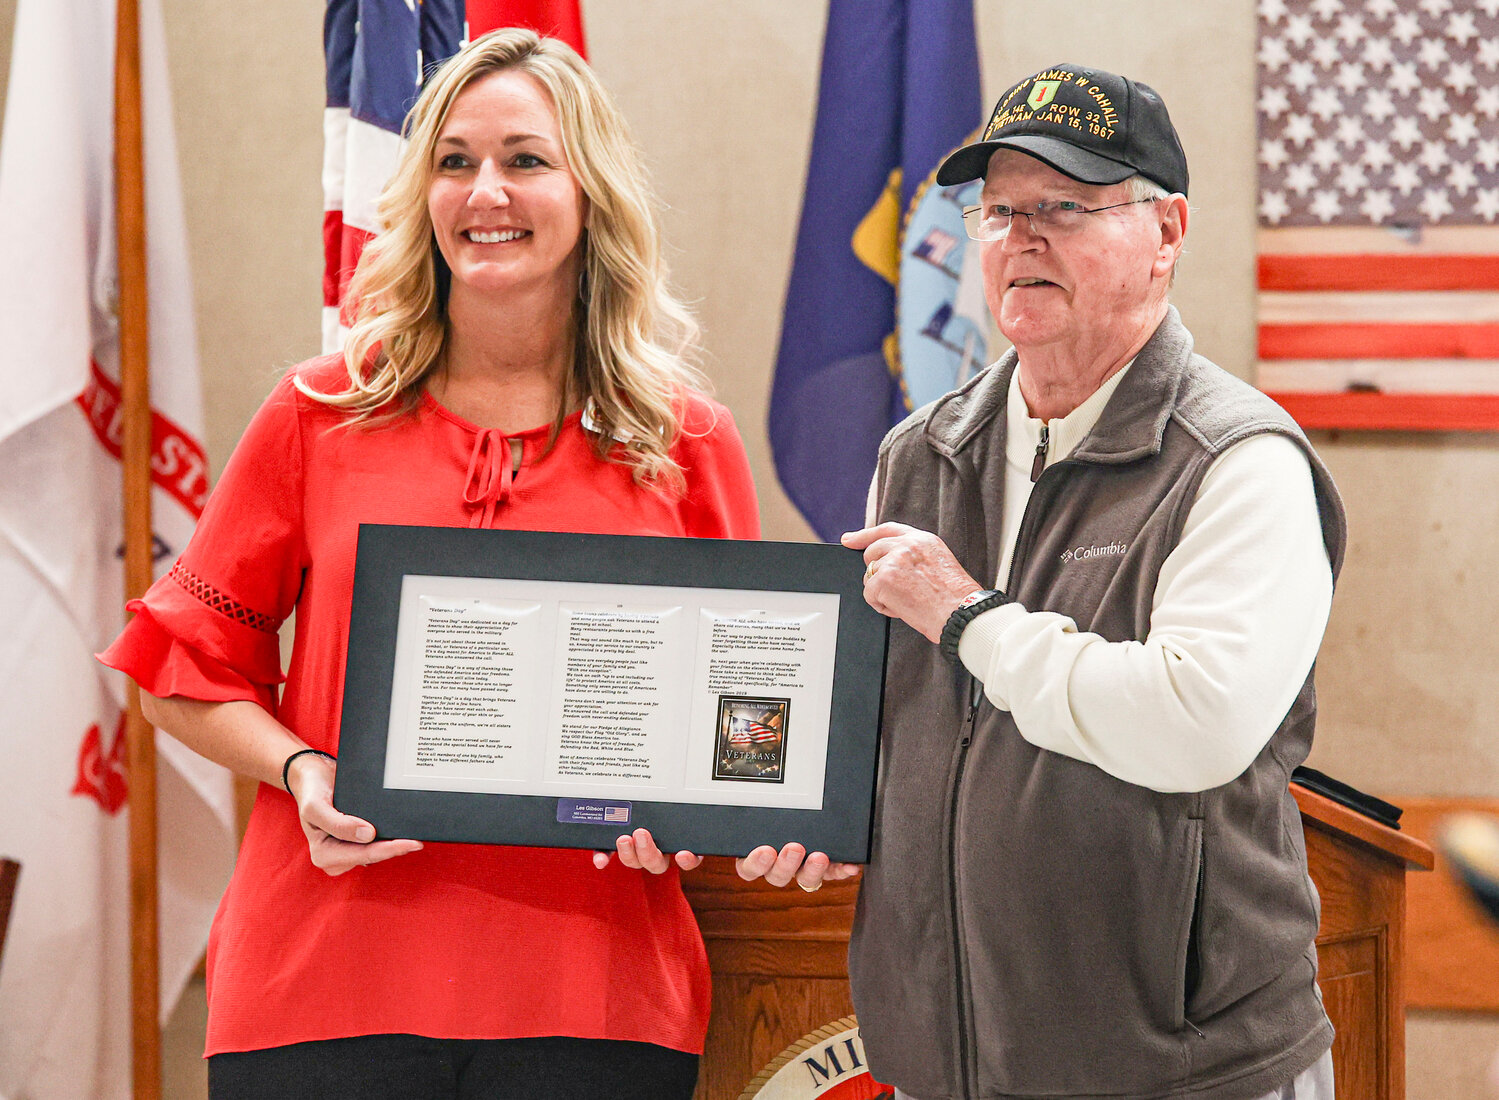 Veteran Les Gipson, right, presents Missouri Veterans’ Home director Aliesha Edwards with a framed copy of his Veterans’ Day poem.